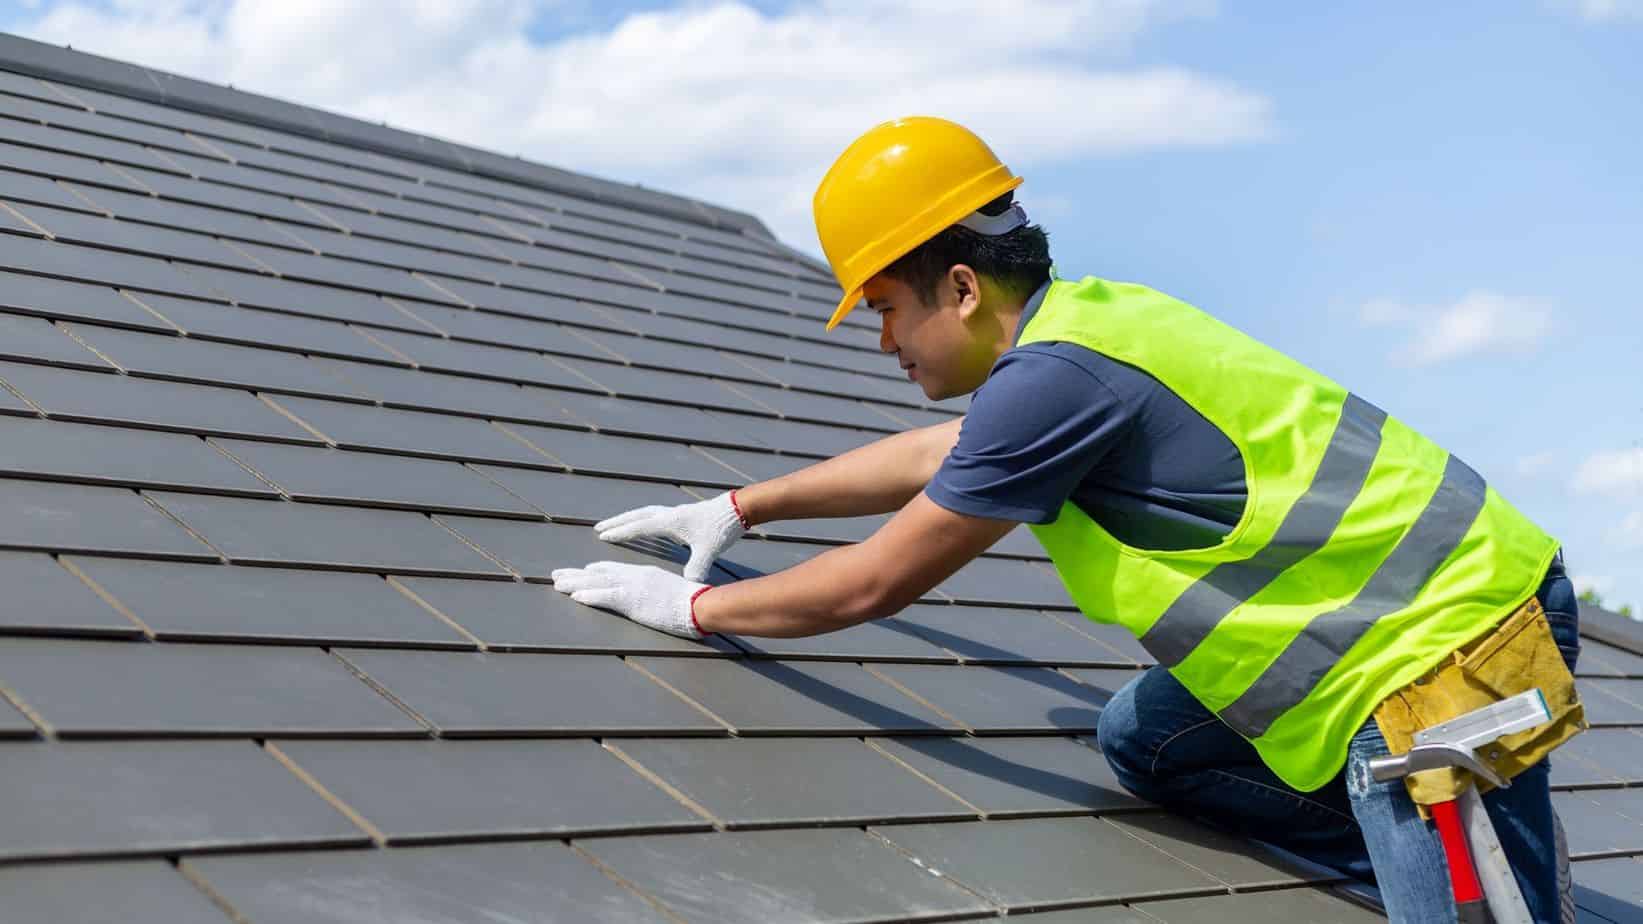 Benefits of Hiring Professionals to Assess Your Roof After Storm